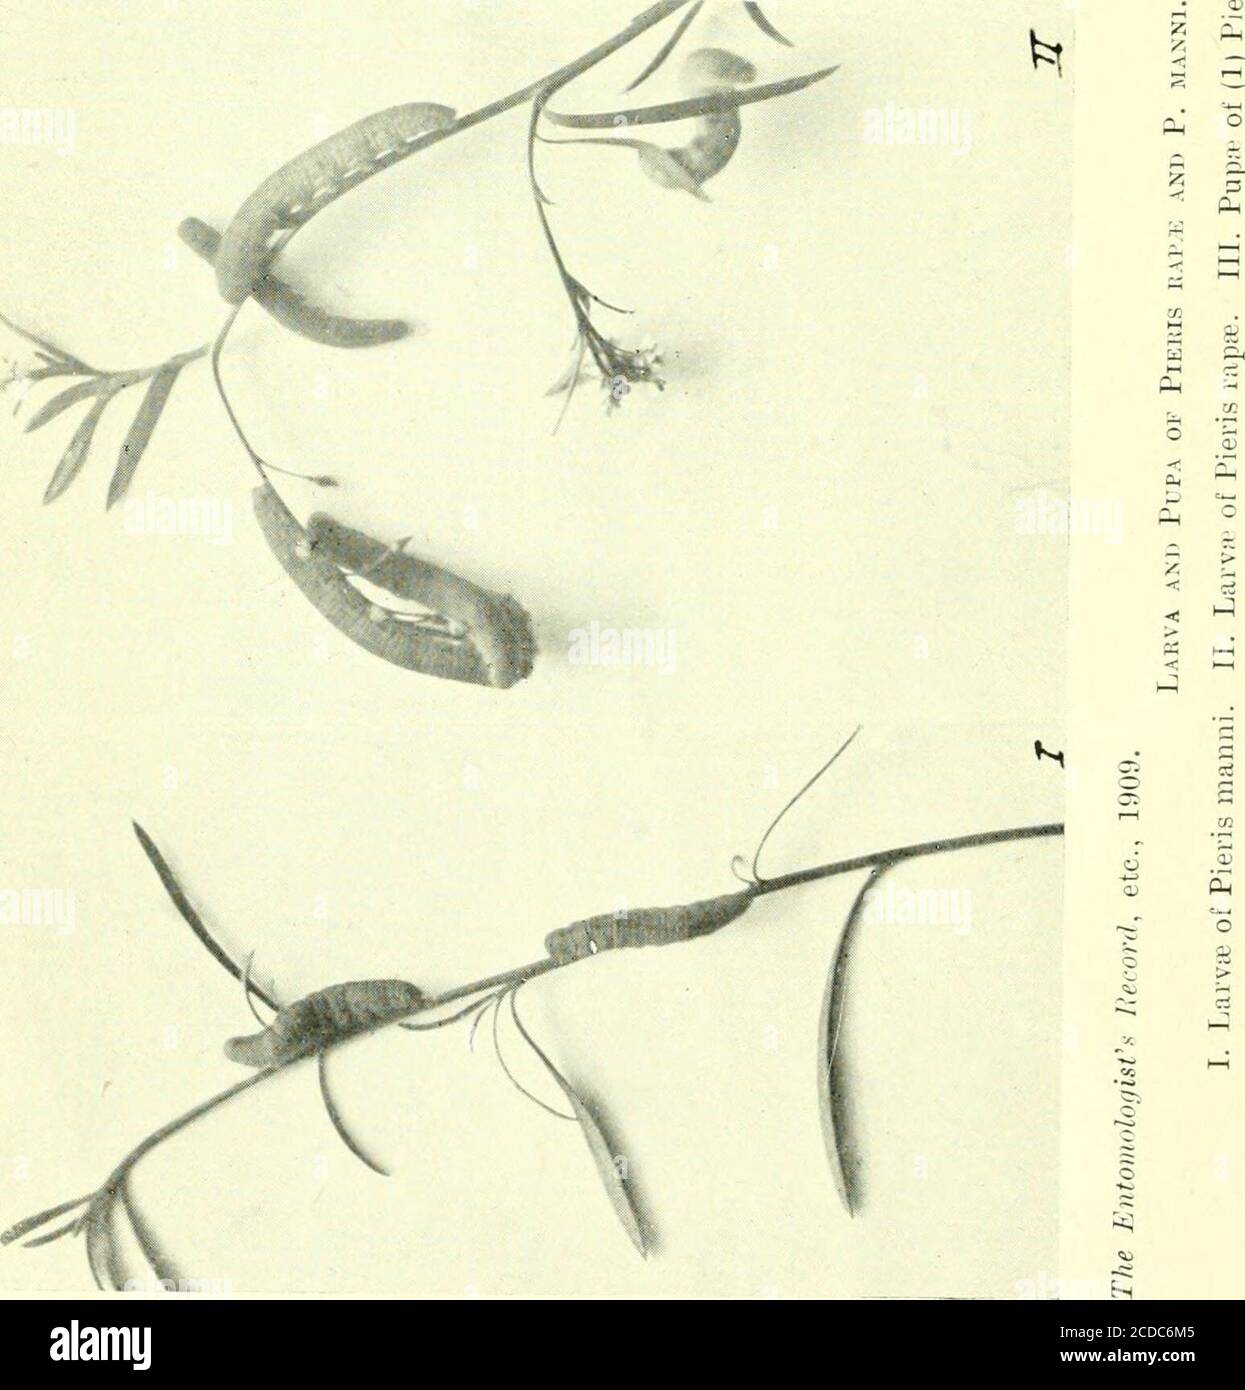 . The Entomologist's record and journal of variation . Dil H. (. Dollmnn.Male Appendages of the species of the genus Anaspls, TJie Entovwlociists Becurcl, etc., 1909. g * i^ ?*9BBI 4 J.,. SPRING BUTTERFLIES IN THE RHONE VALLEY. 53 Spring butterflies in the Rhone Valley. By A. S. TETLEY, M.A. A few notes on a short excursion into the Rhone Valley during thefirst fortnight of June, 1908, may prove of interest in comparisonwith those on a similar tour undertaken in the latter half of May,1907. The past season, at any rate in the early months, seemed to be,if anything, a forward one in Valais. It Stock Photo